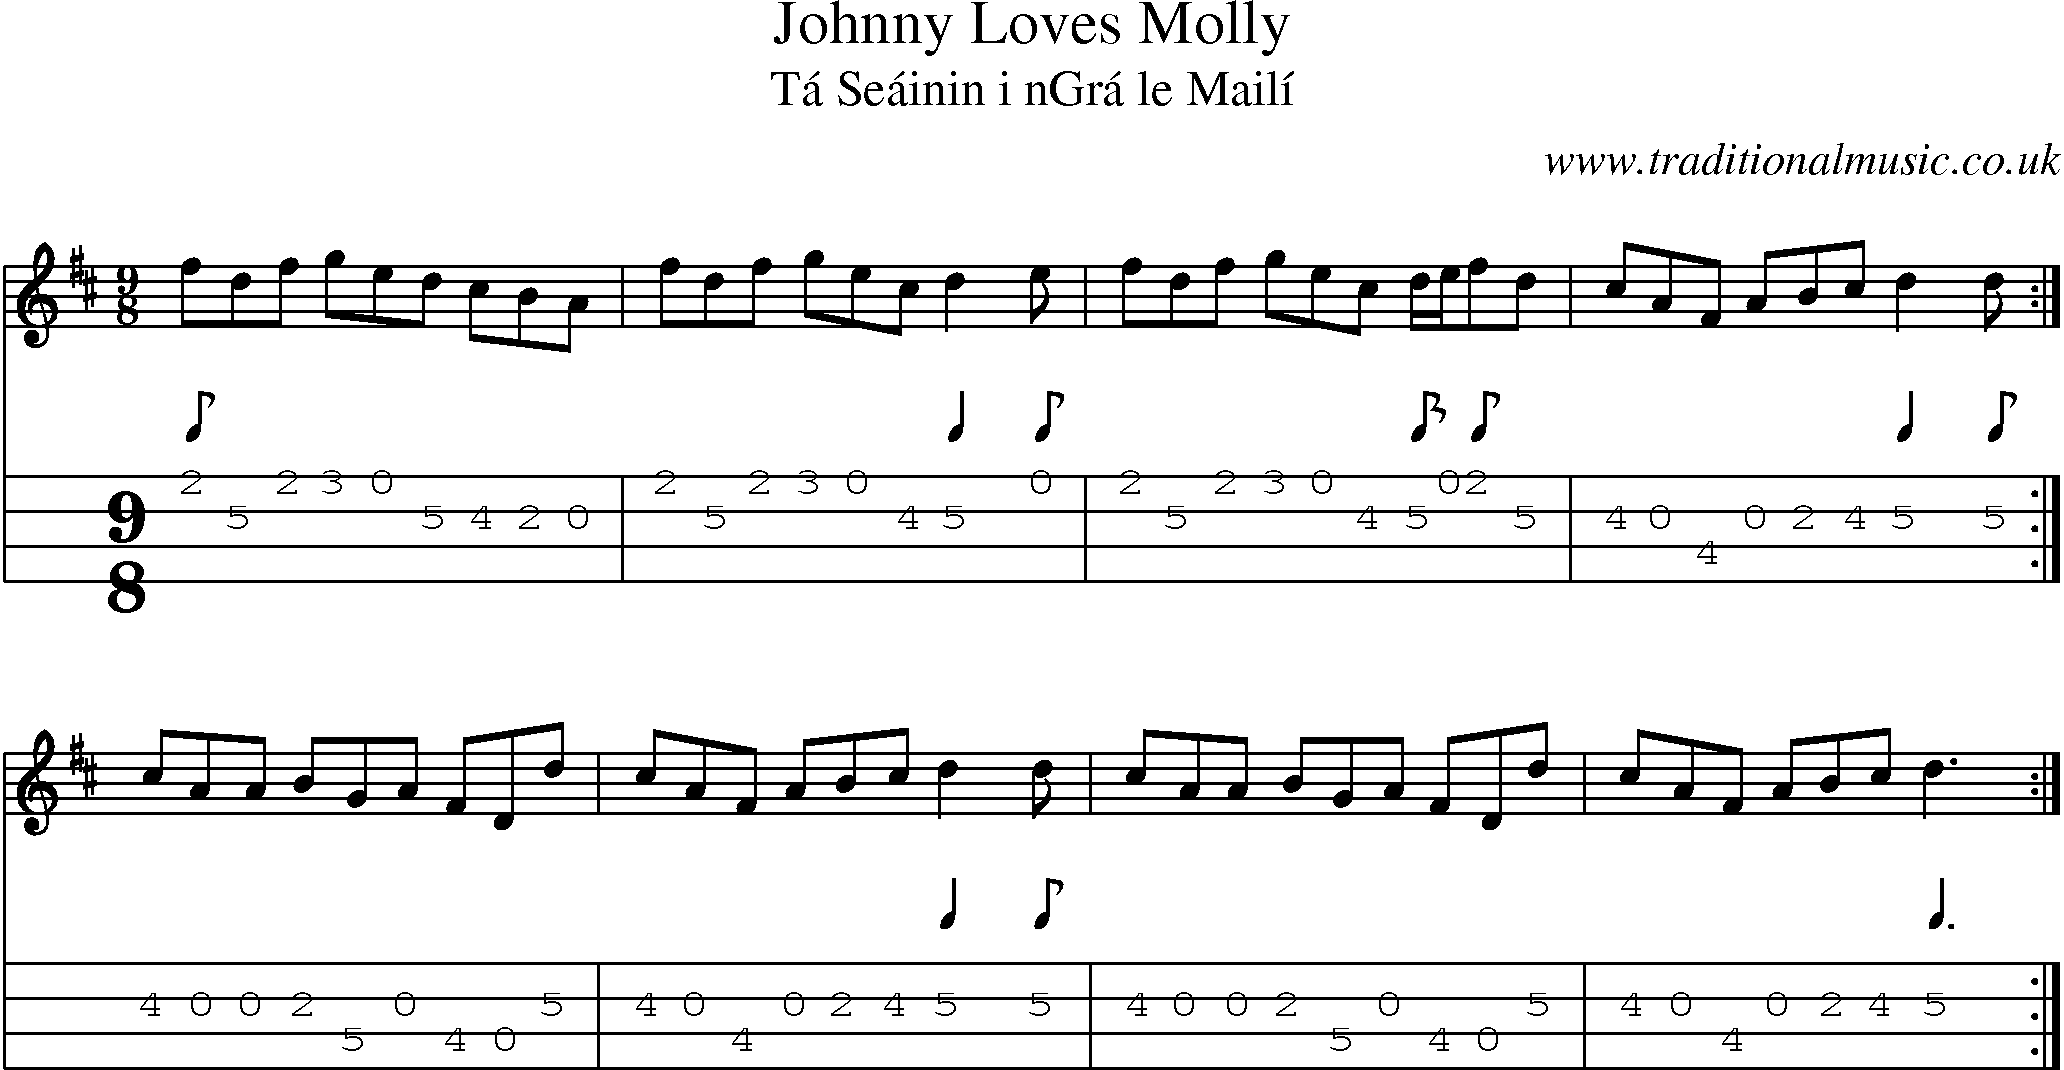 Music Score and Mandolin Tabs for Johnny Loves Molly